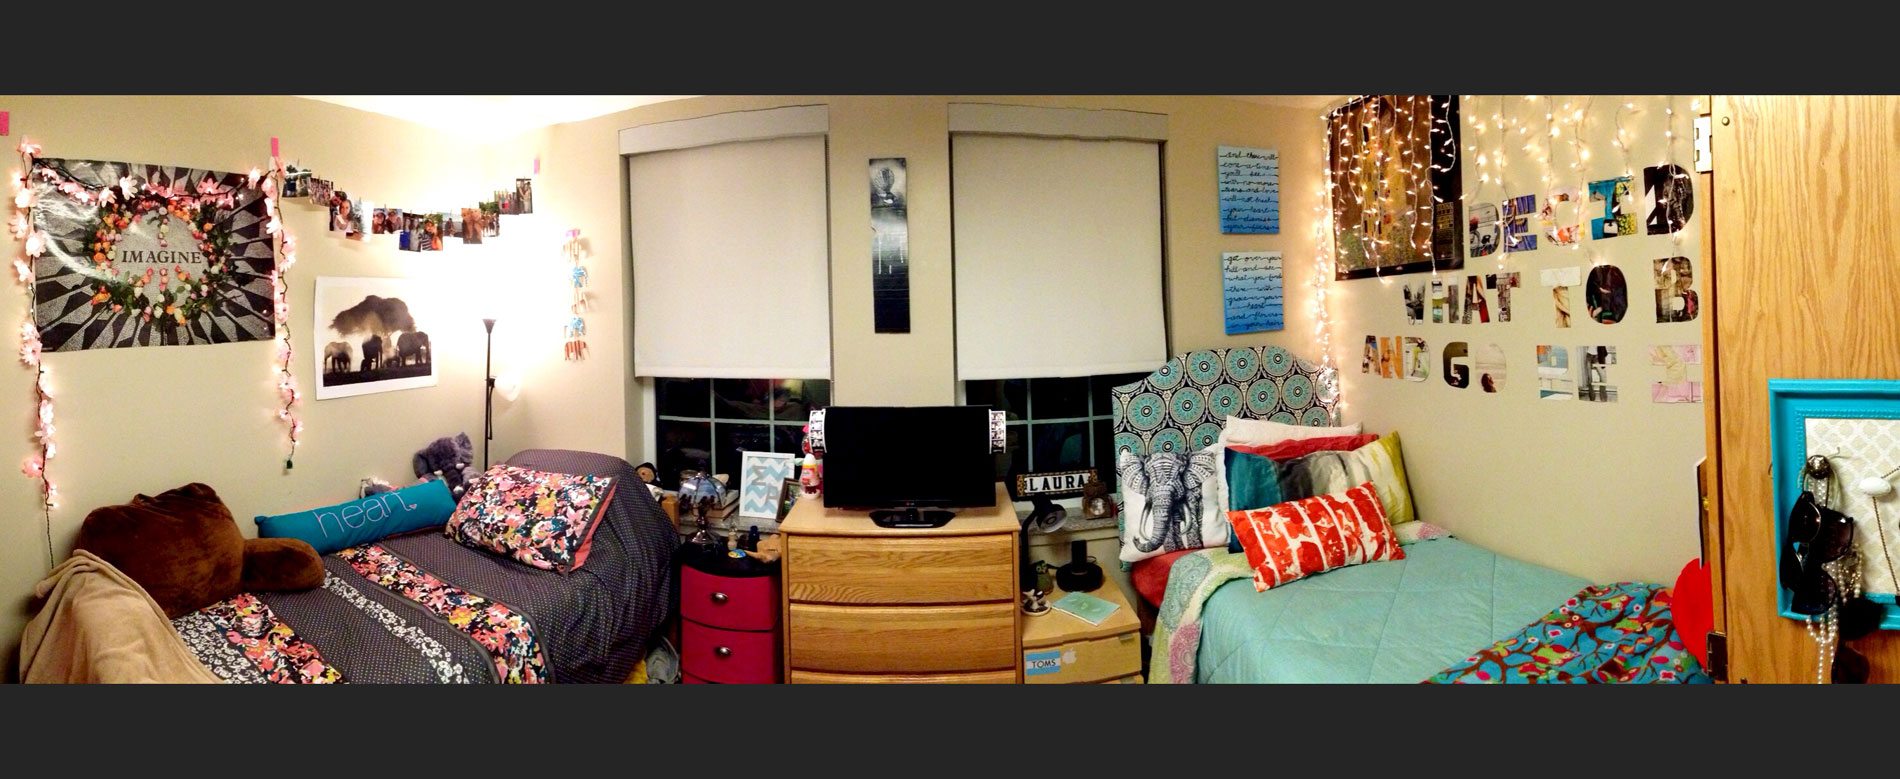 Dorm room with decorations and furnishings on two beds with a desk in between